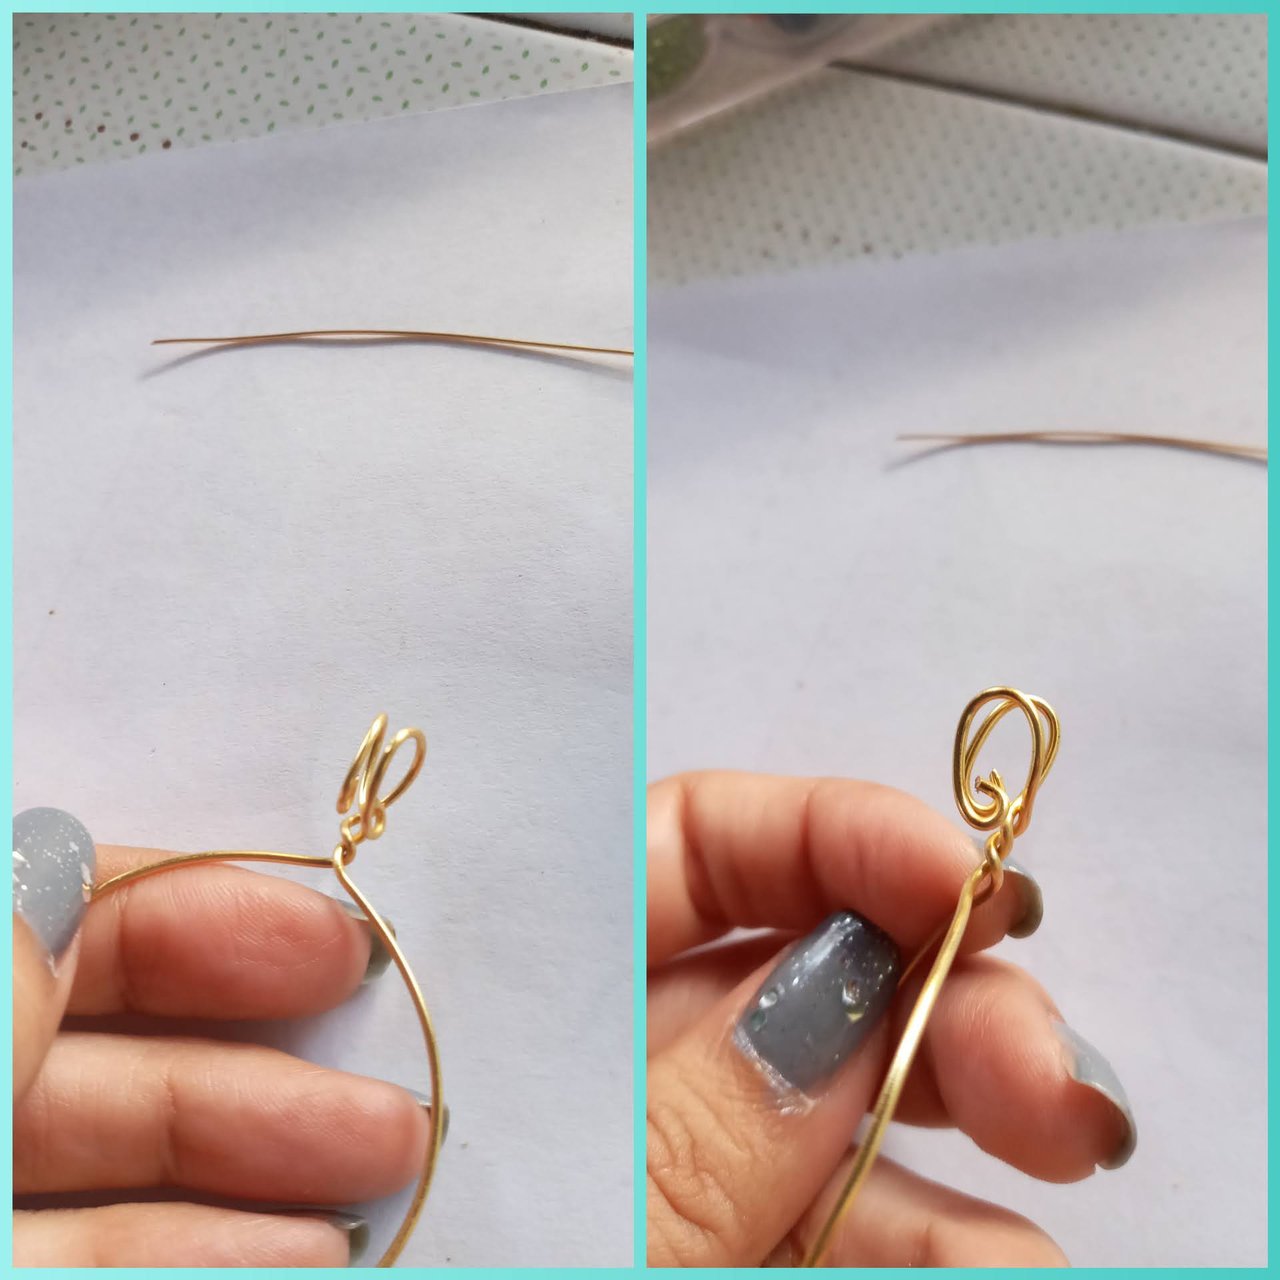 How to make wire earrings step by step